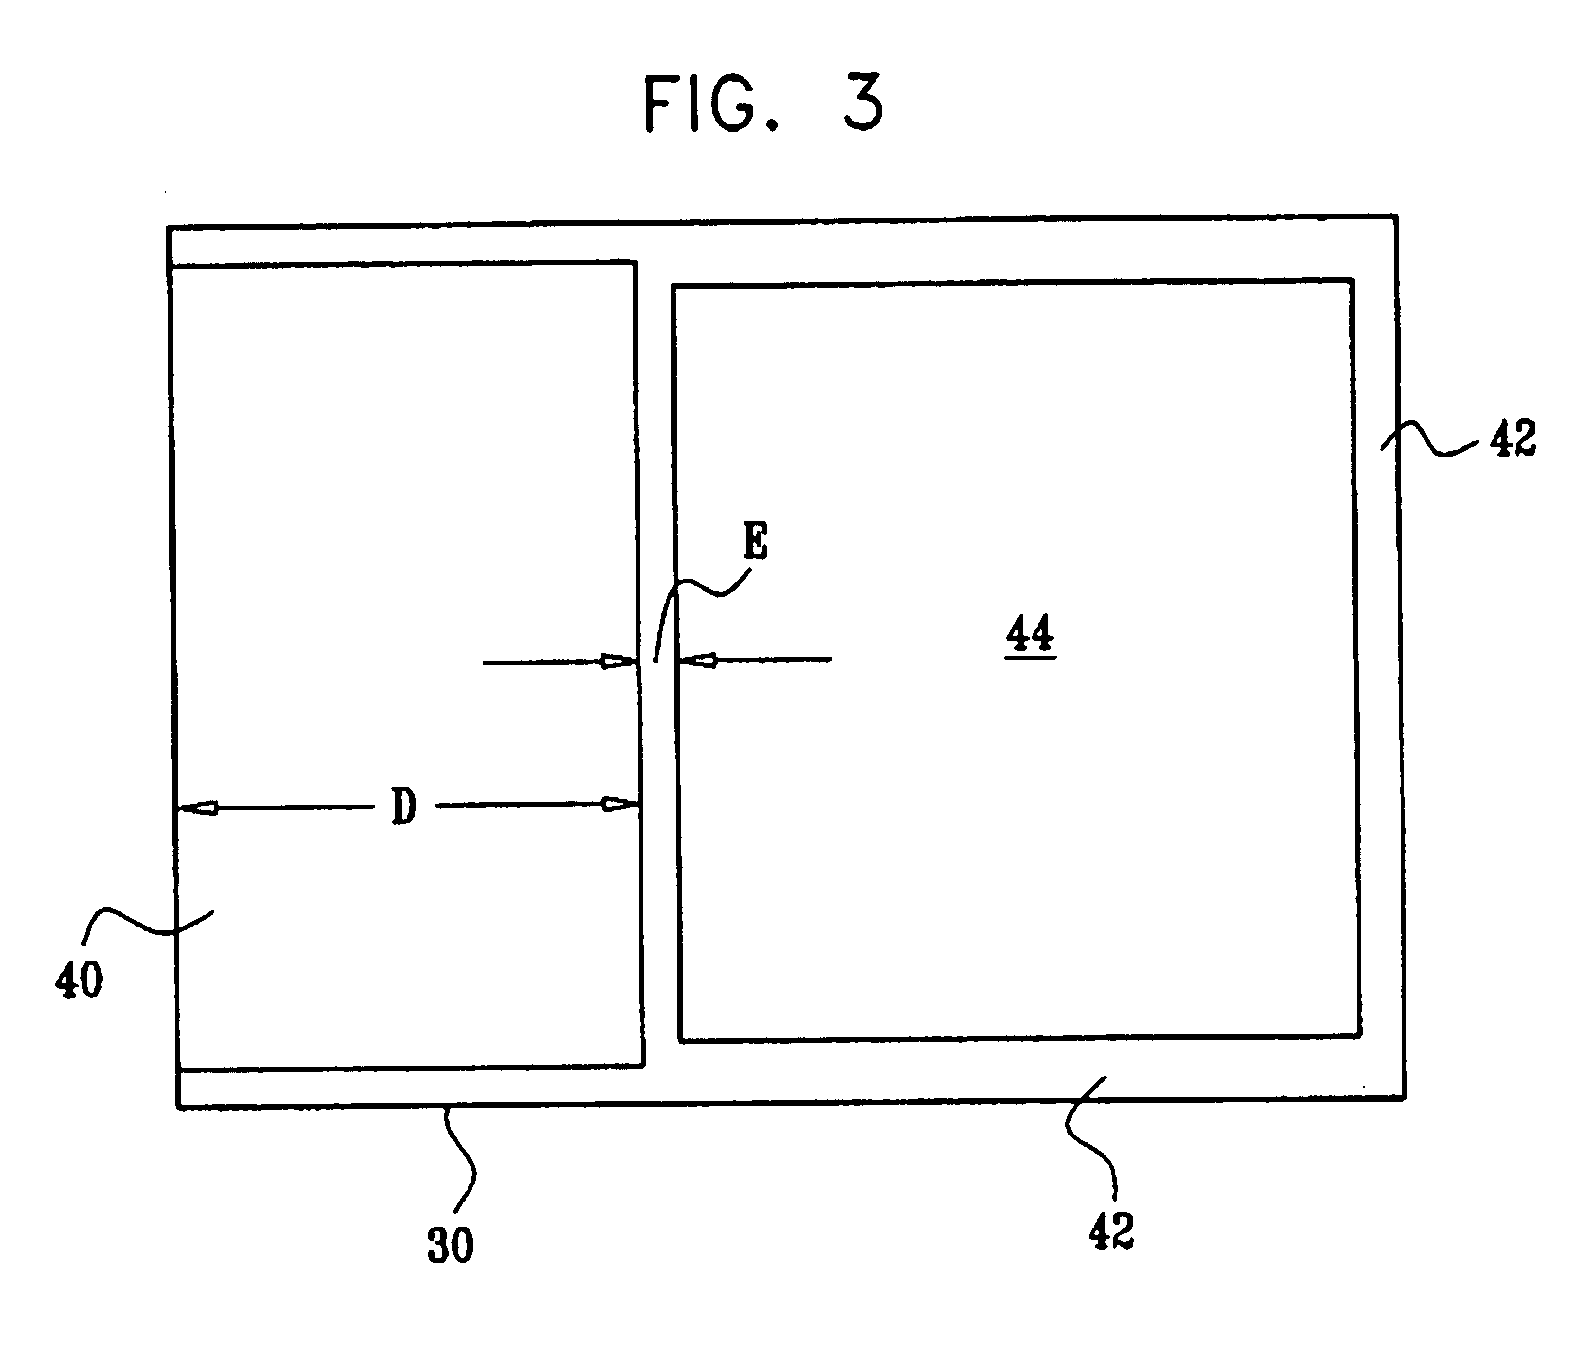 Programmable spatial filter for wafer inspection